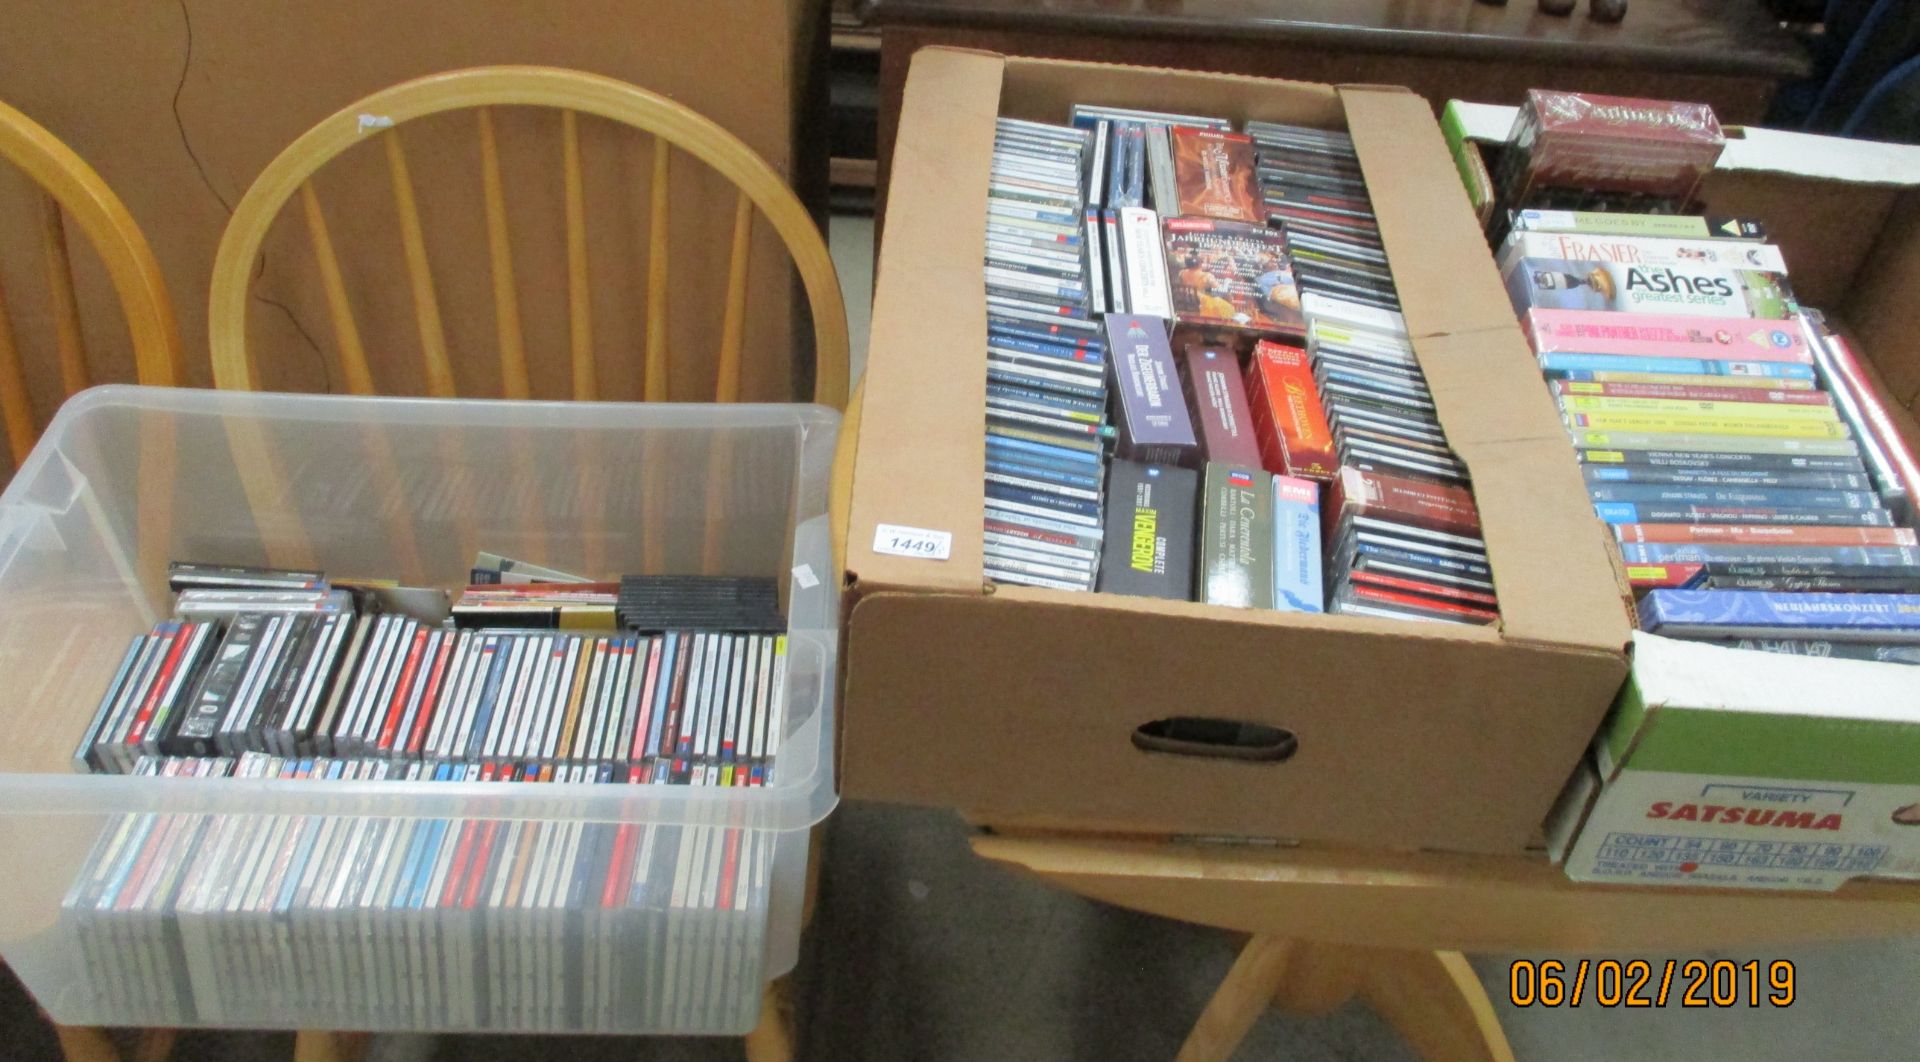 Contents to 3 trays - 26 DVD box sets and individual DVD's - comedy,